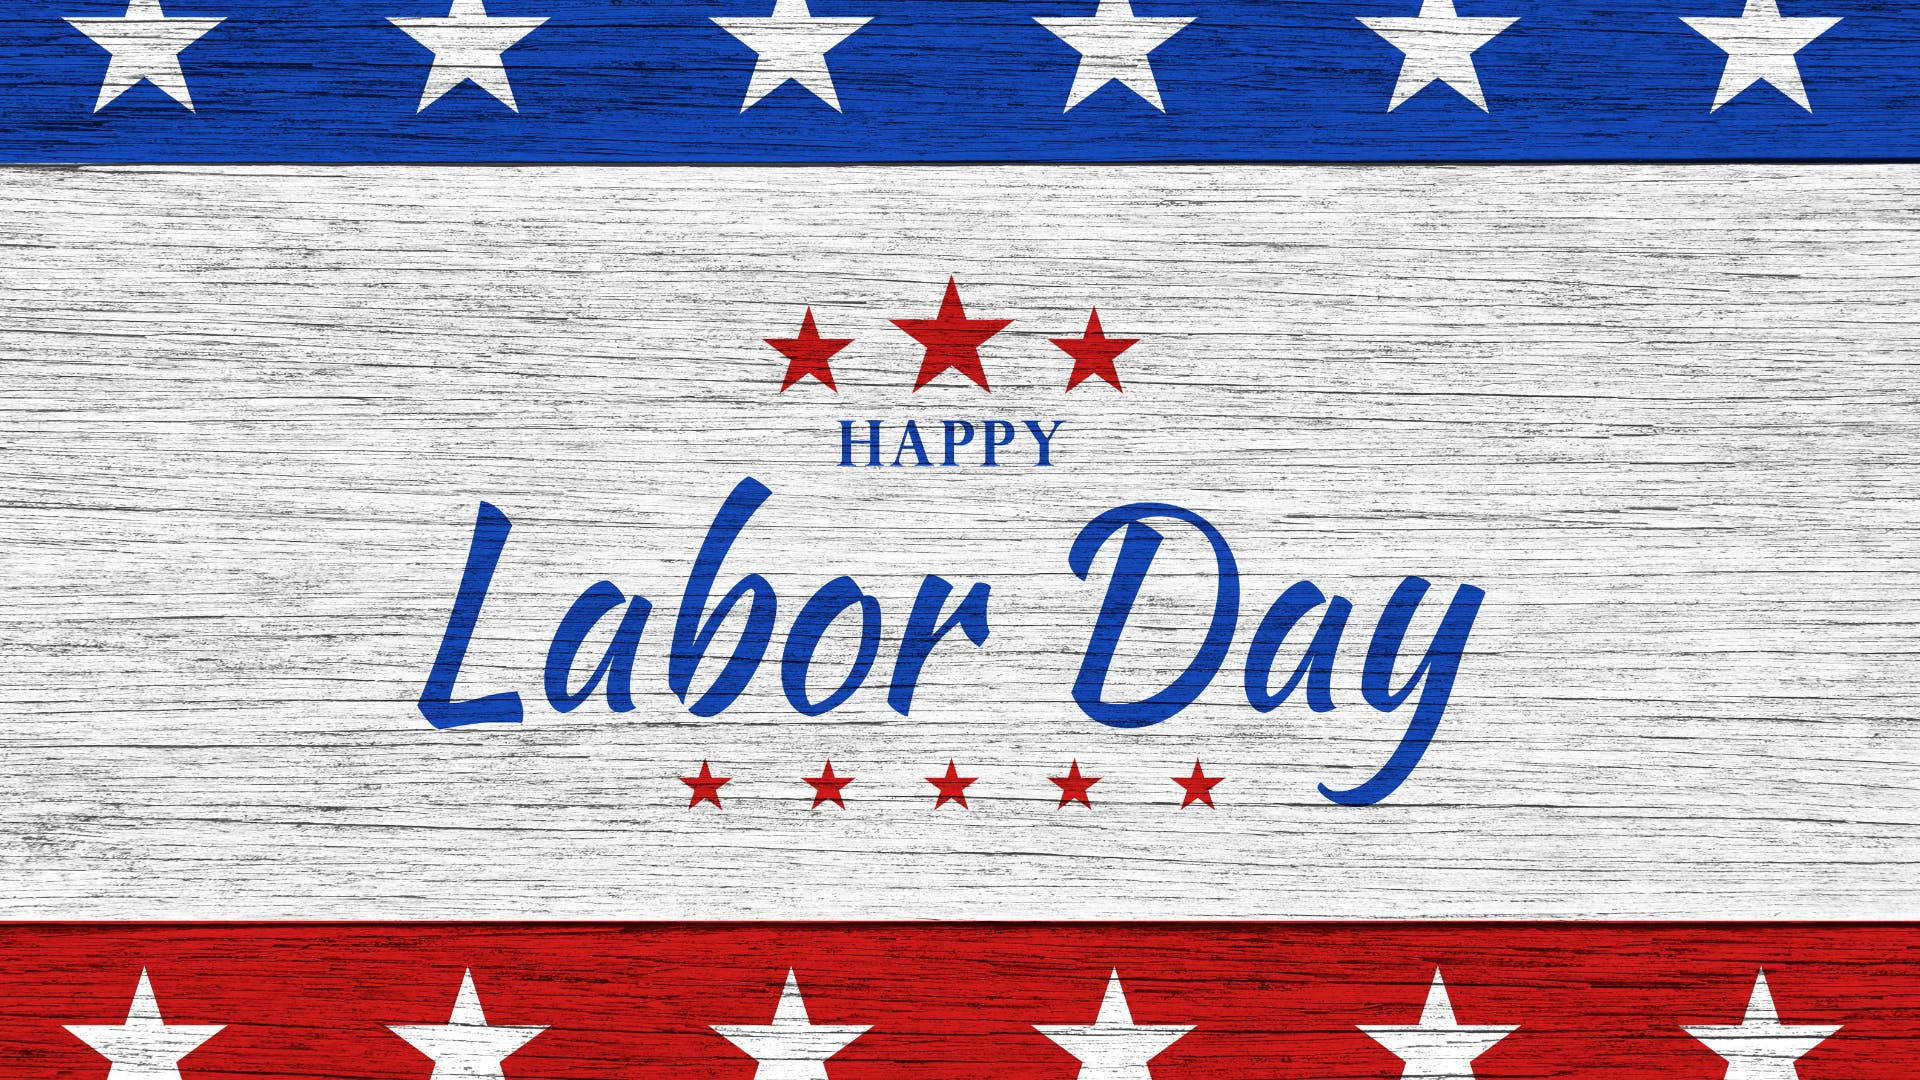 Labor Day Greetings On Wood